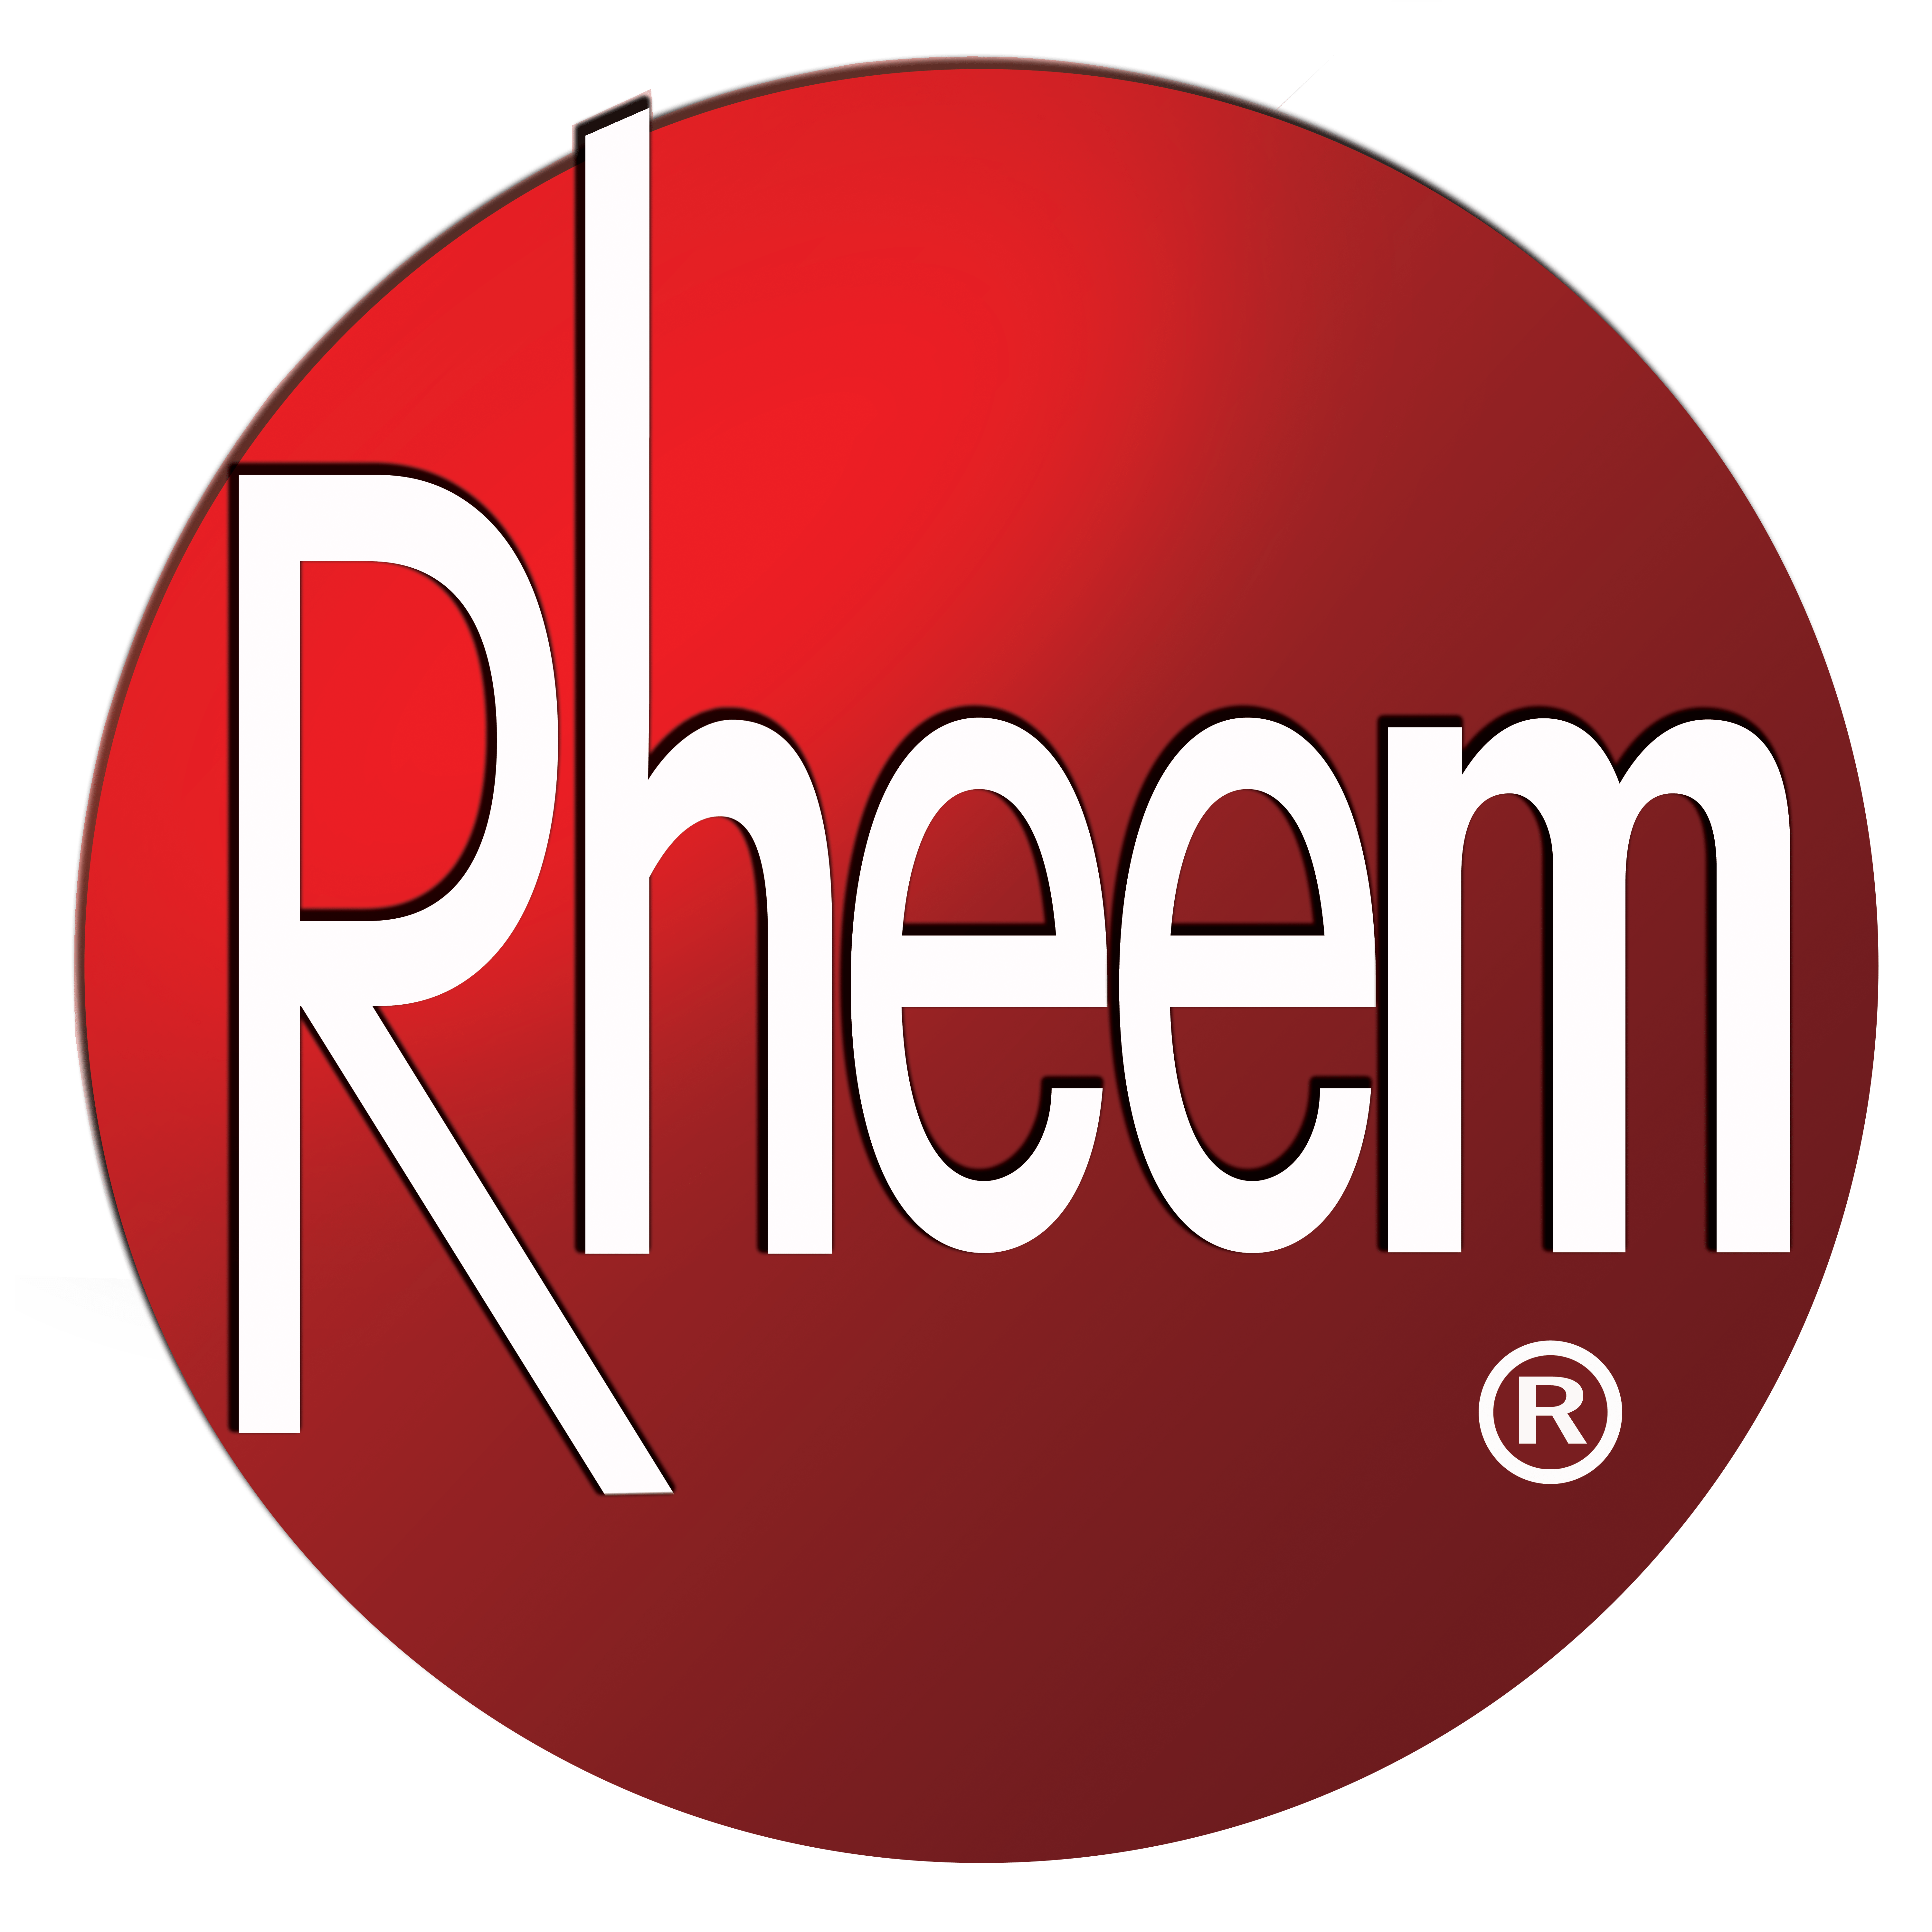 Rheem Logo - Rheem Logo Png (99+ images in Collection) Page 3